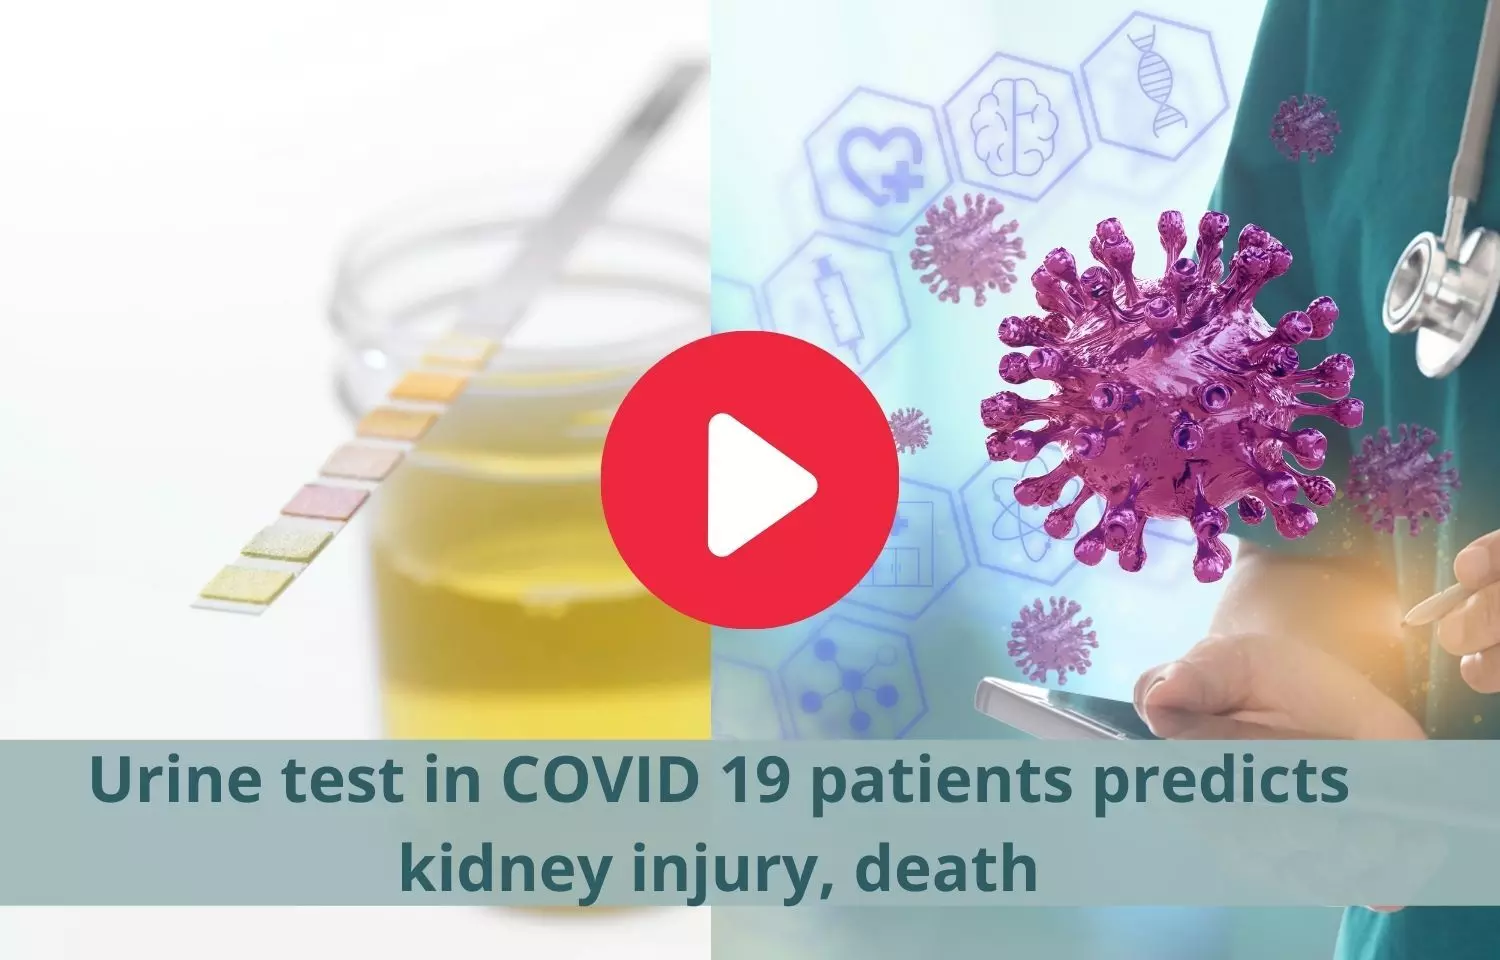 Urine test in COVID patients predicts kidney injury, death